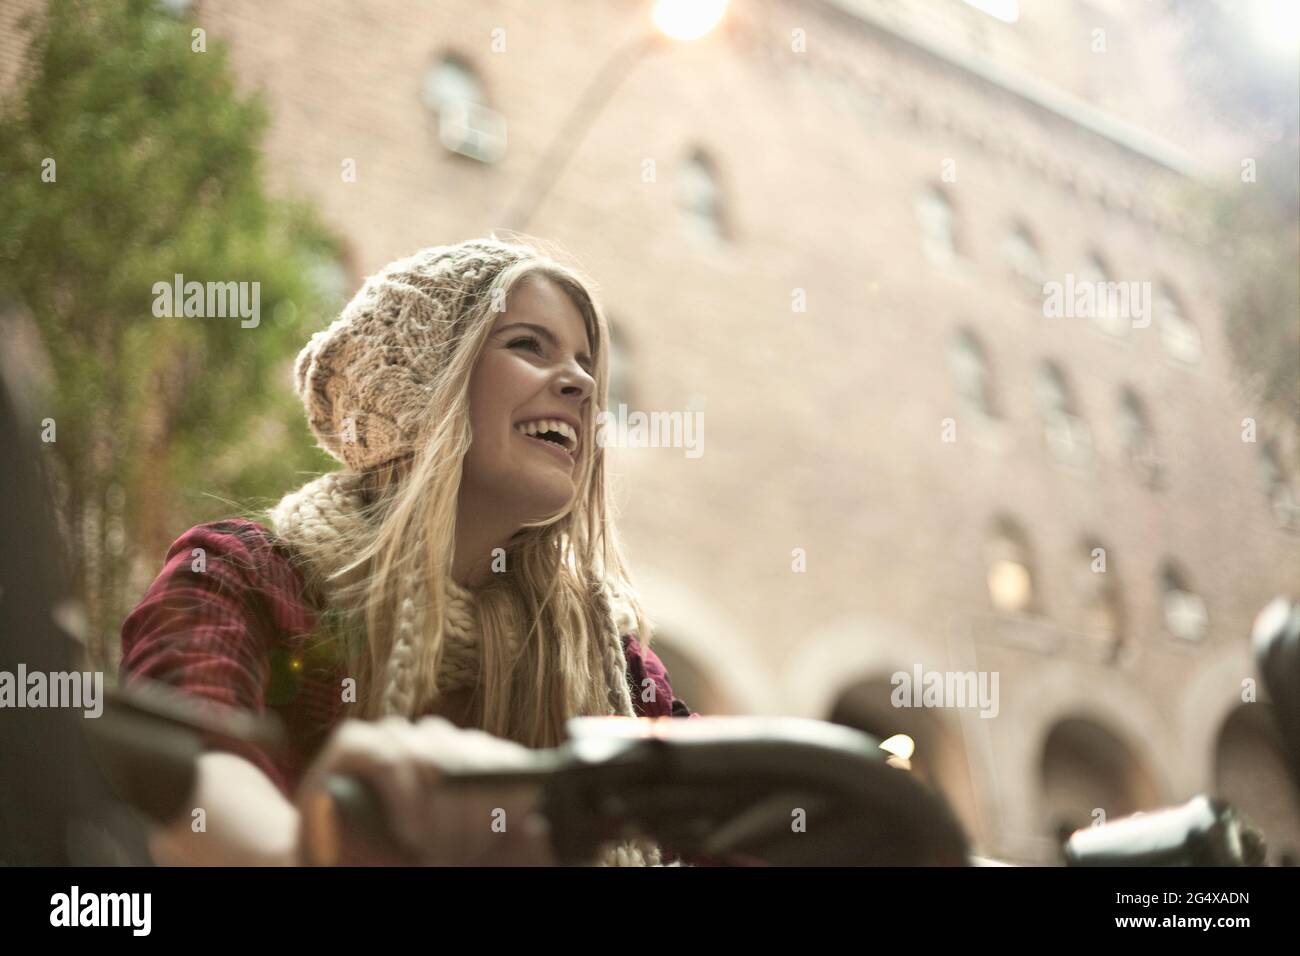 Cheerful young woman cycling in city Stock Photo